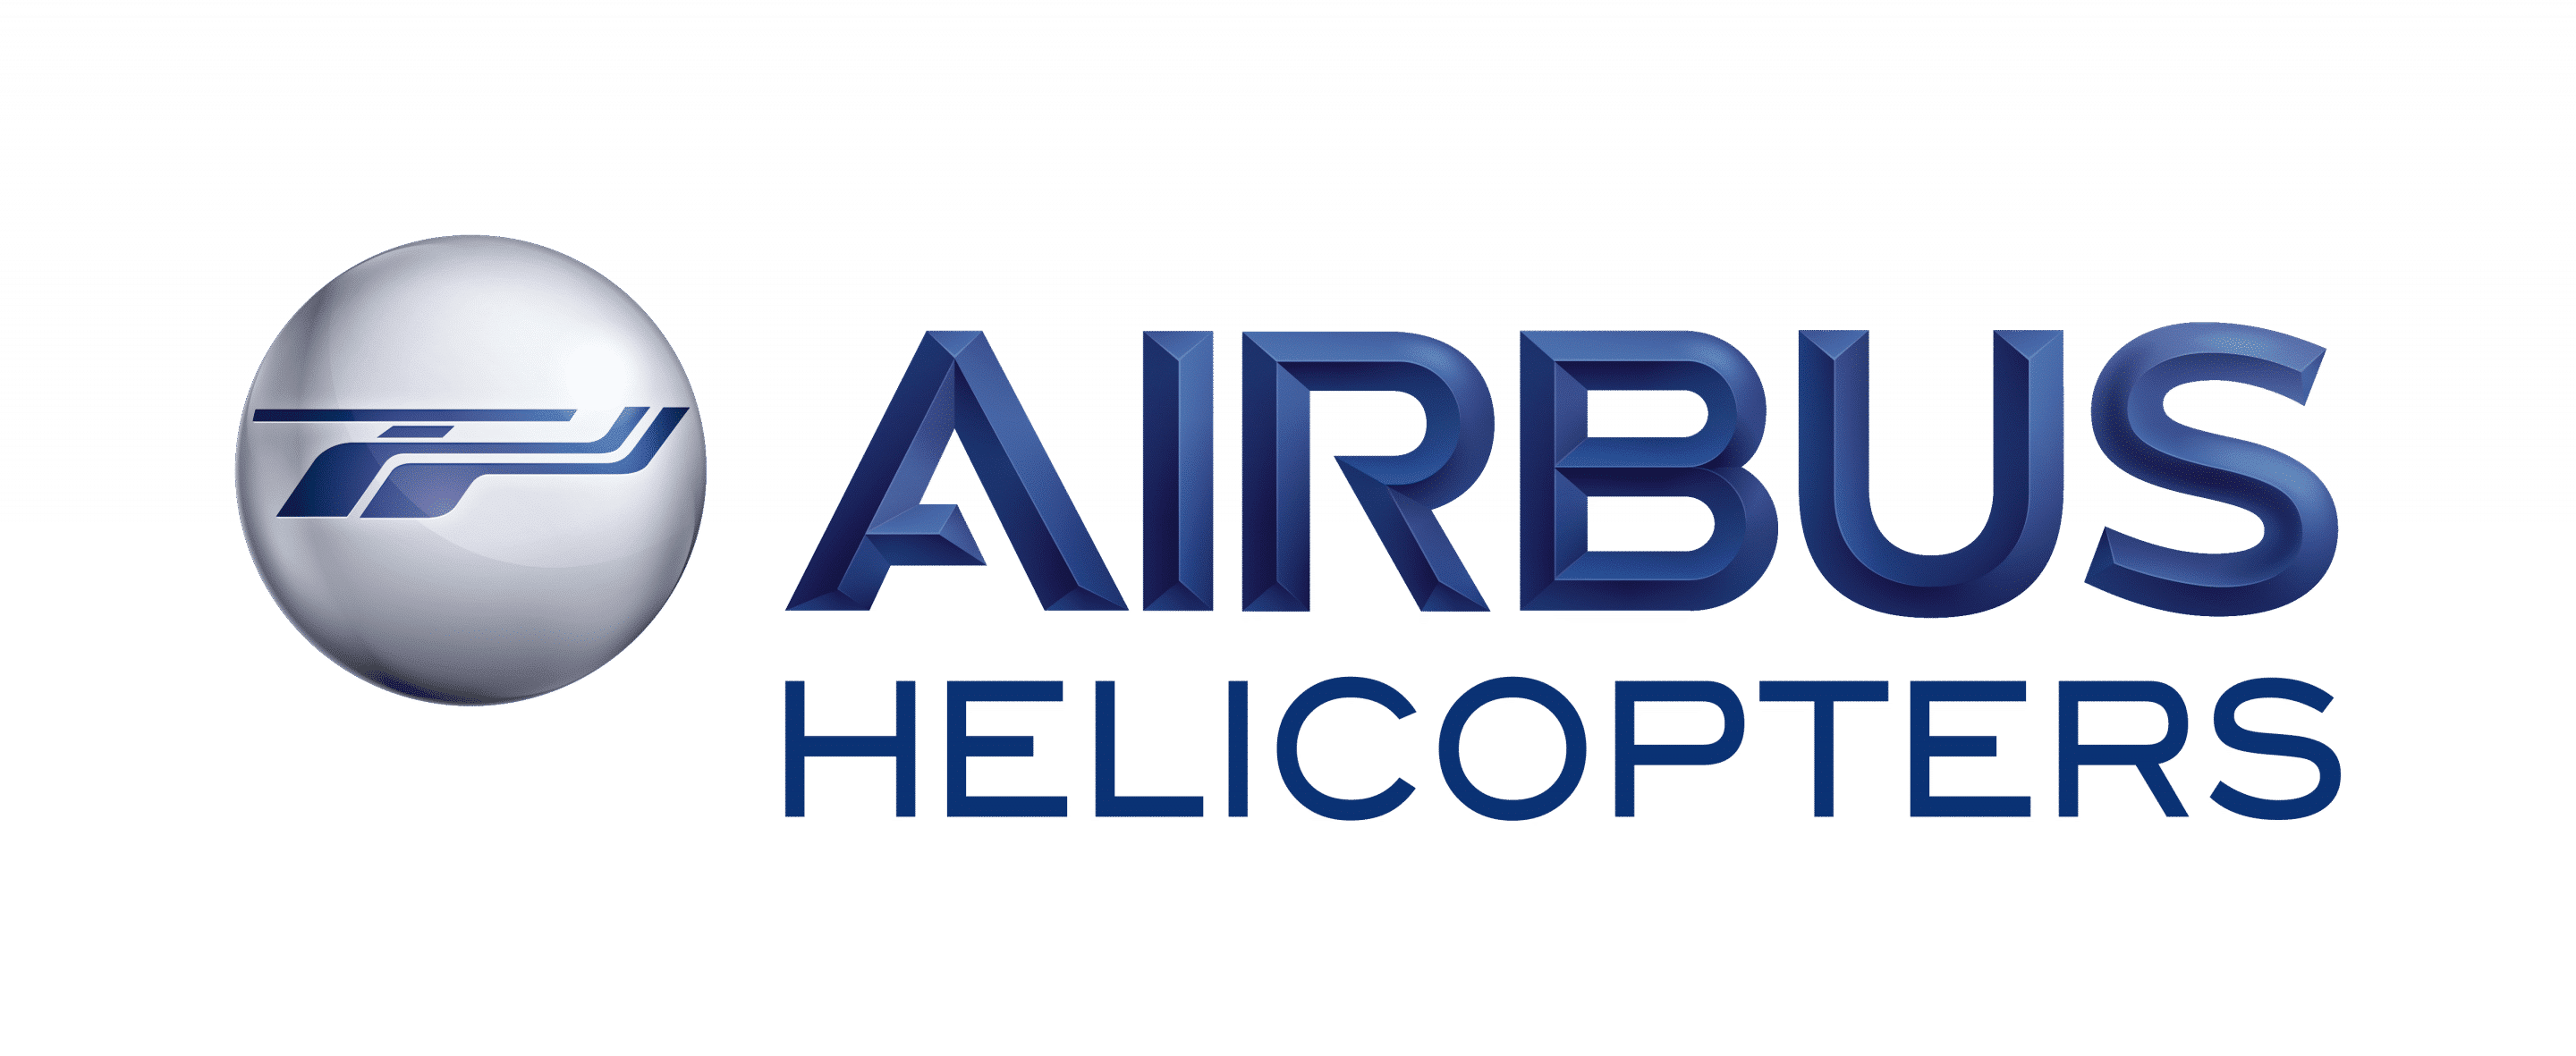 The Airbus Helicopters logo